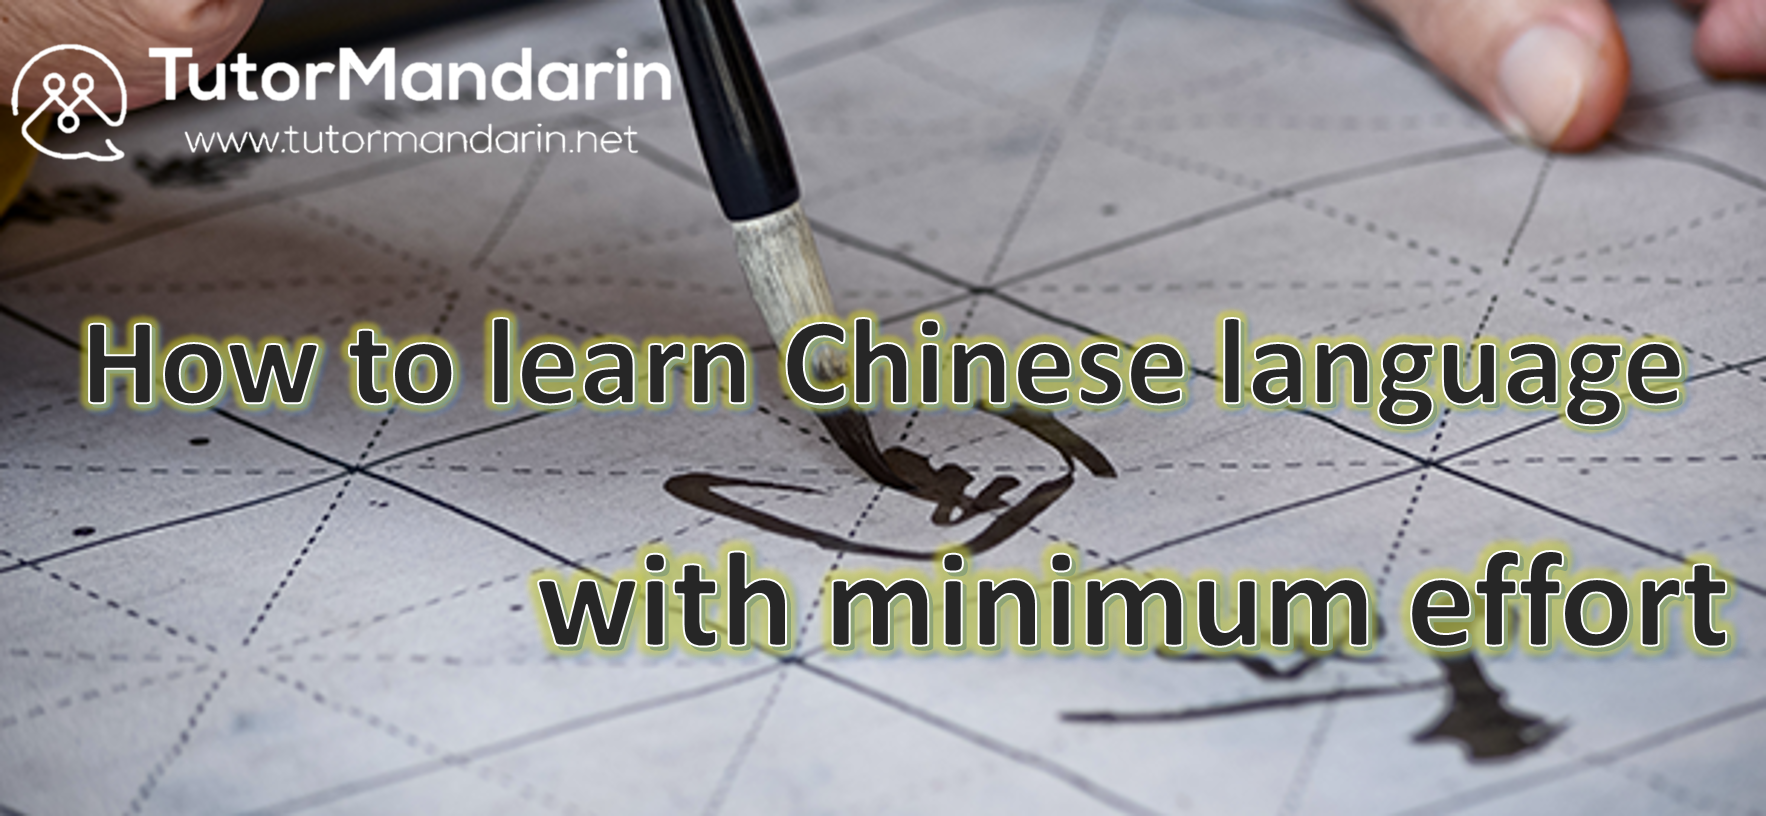 learn Chinese language effortlessly